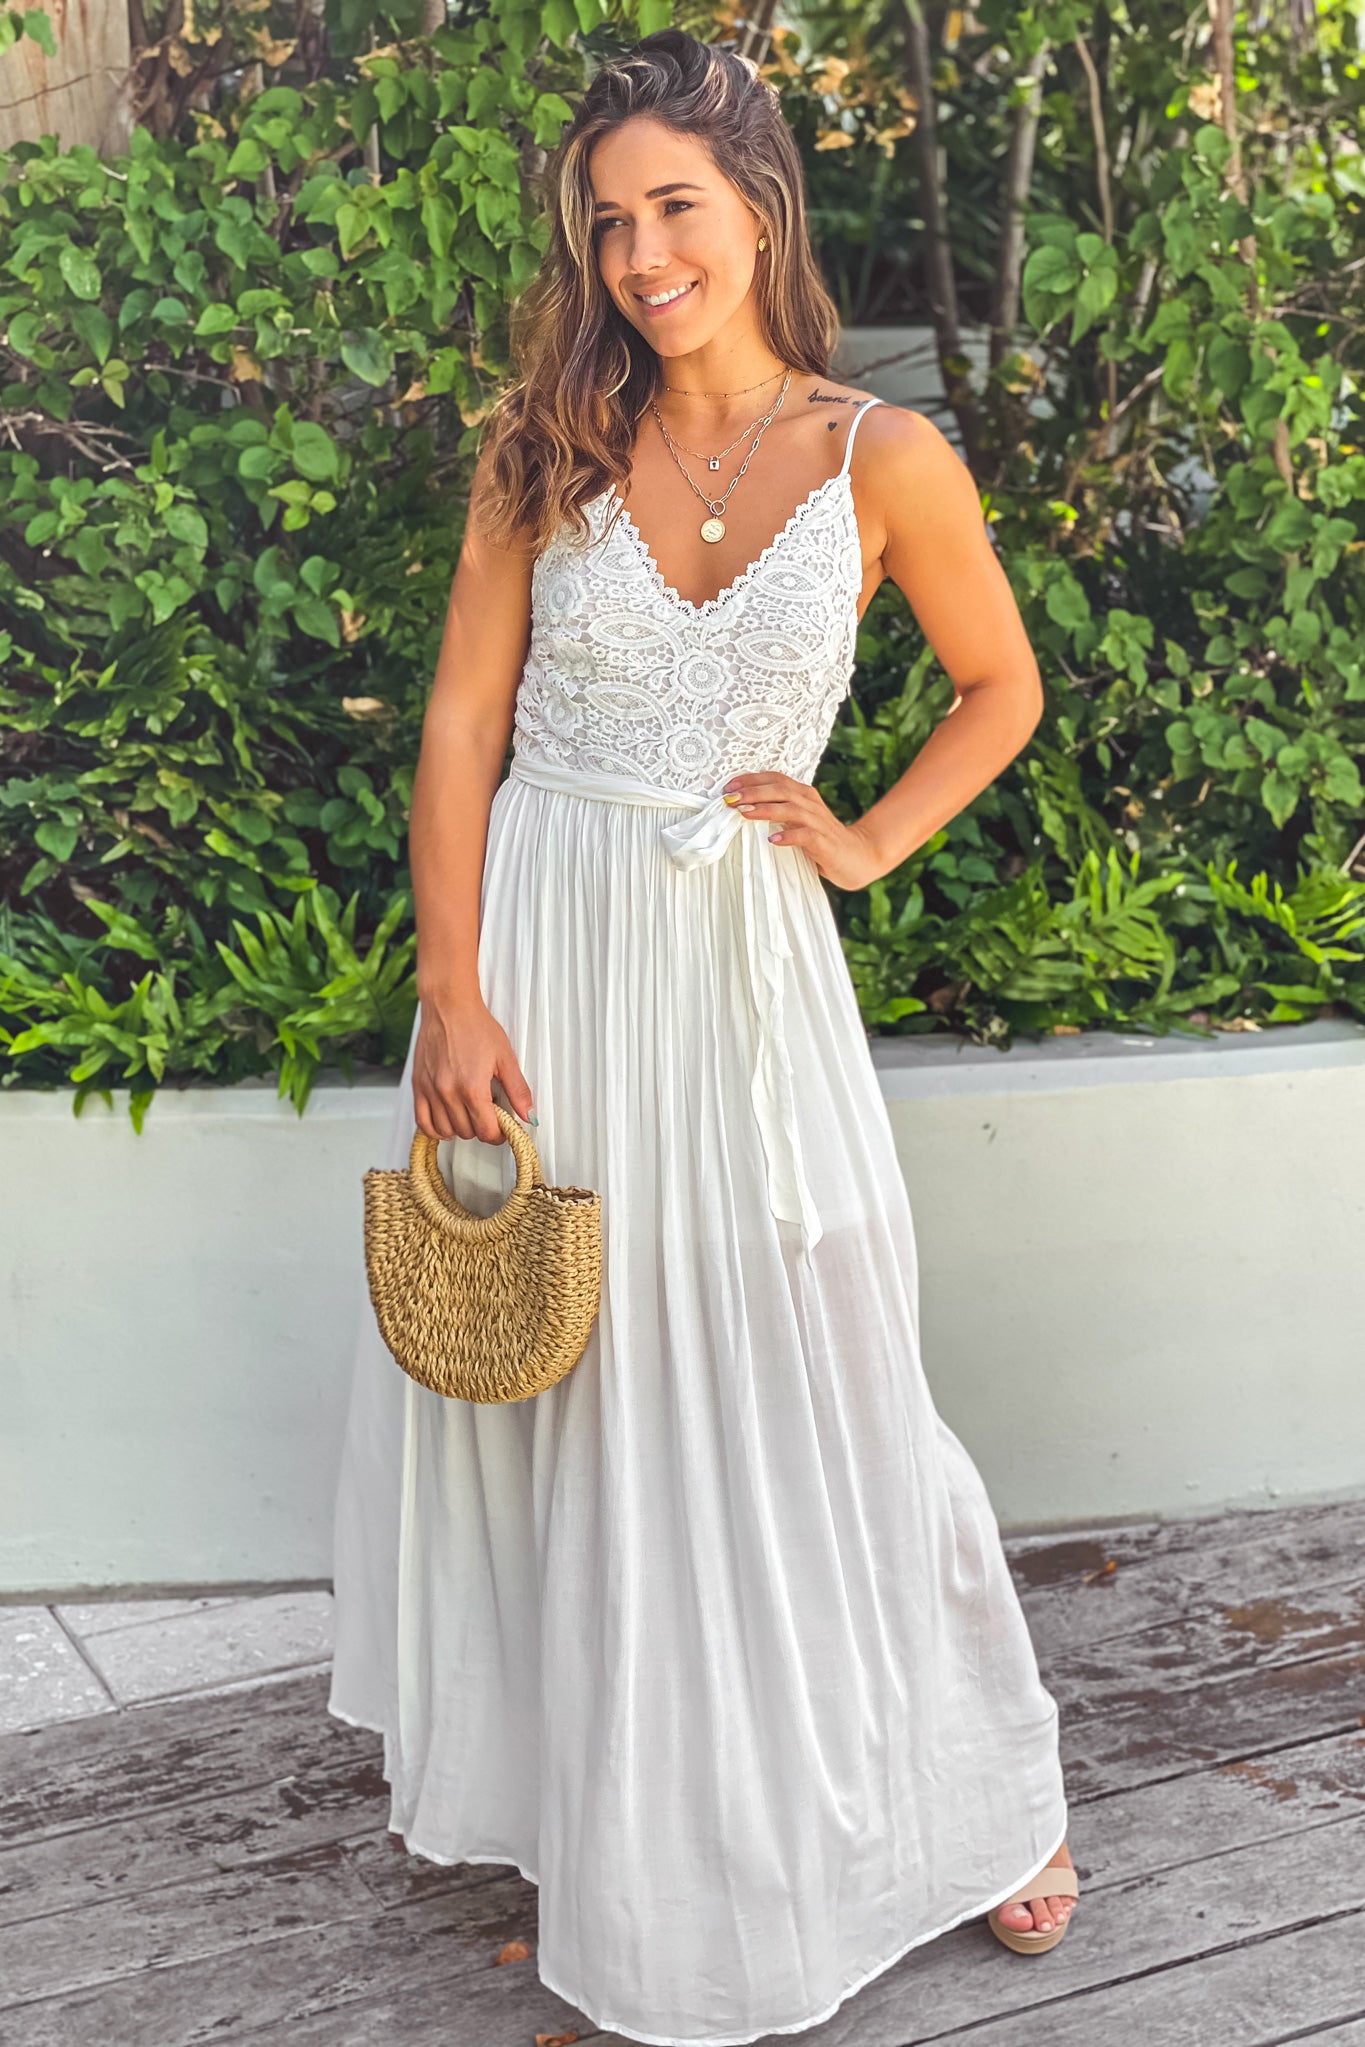 Off White Maxi Dress With Crochet Top And Belt | Formal Dresses – Saved ...